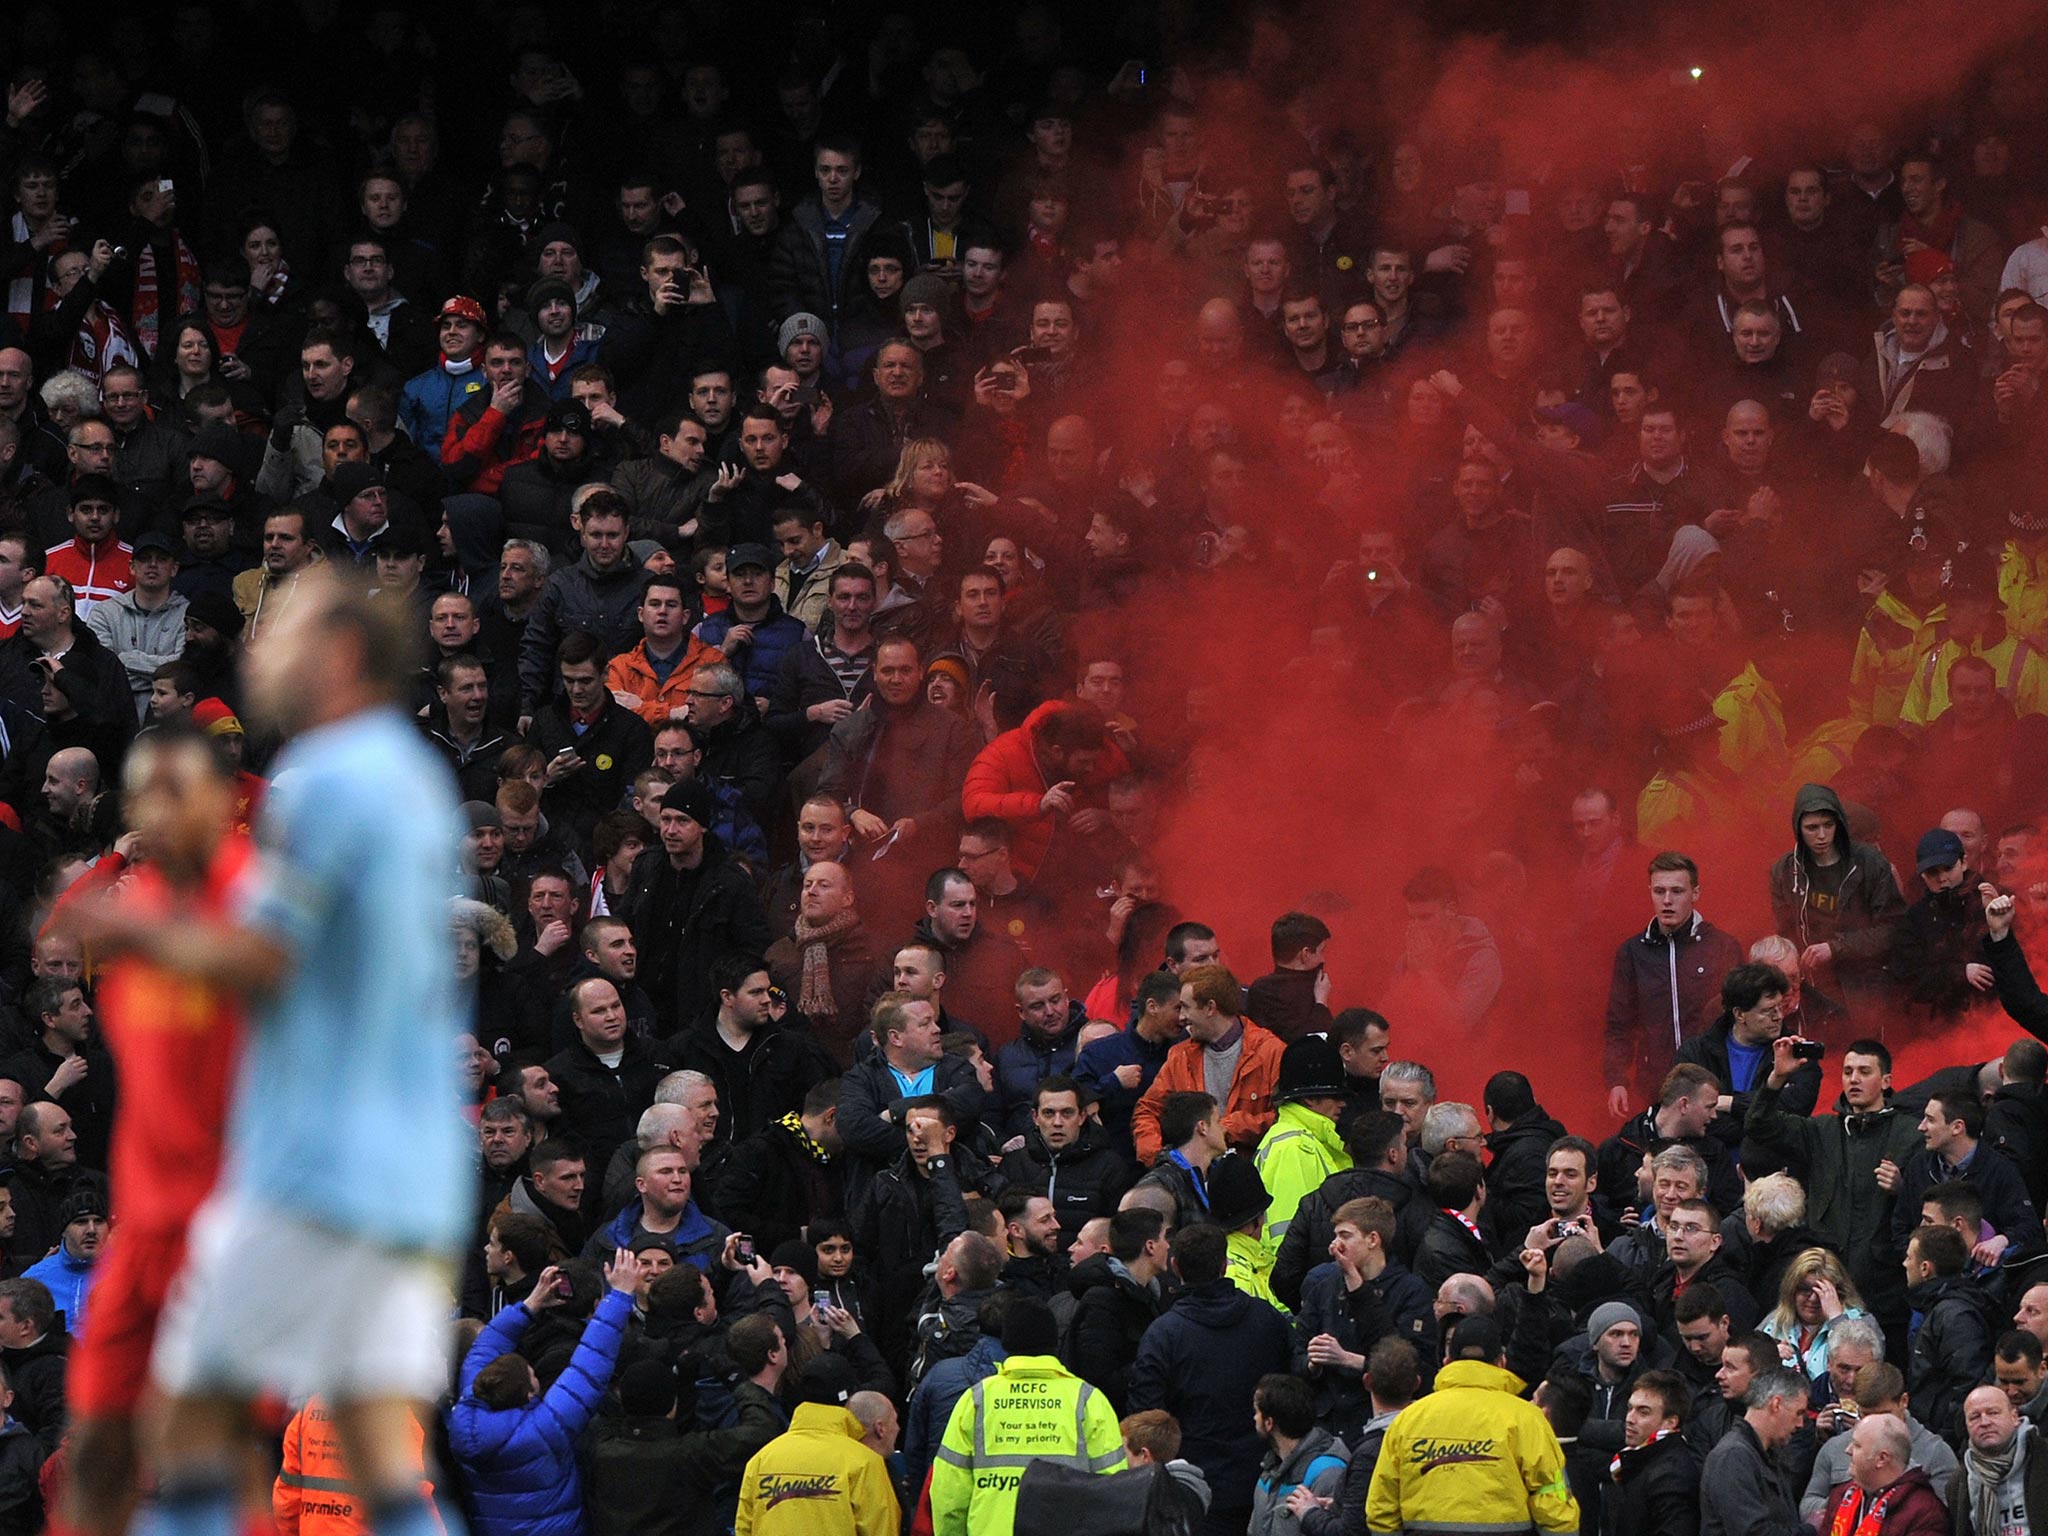 Liverpool fans set off a flare at the Etihad stadium